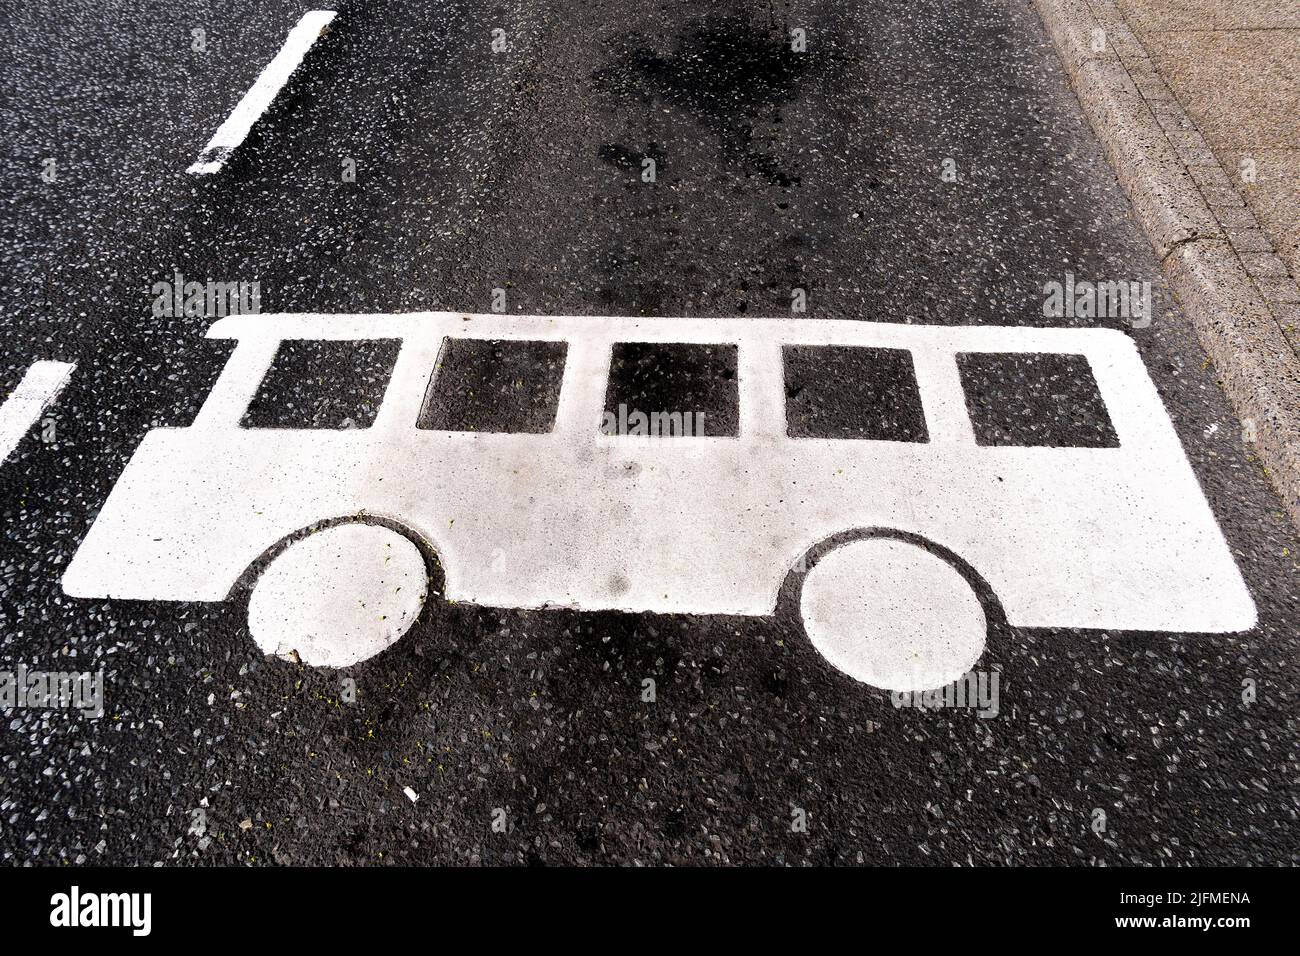 Street sign marking a lane for busses Stock Photo